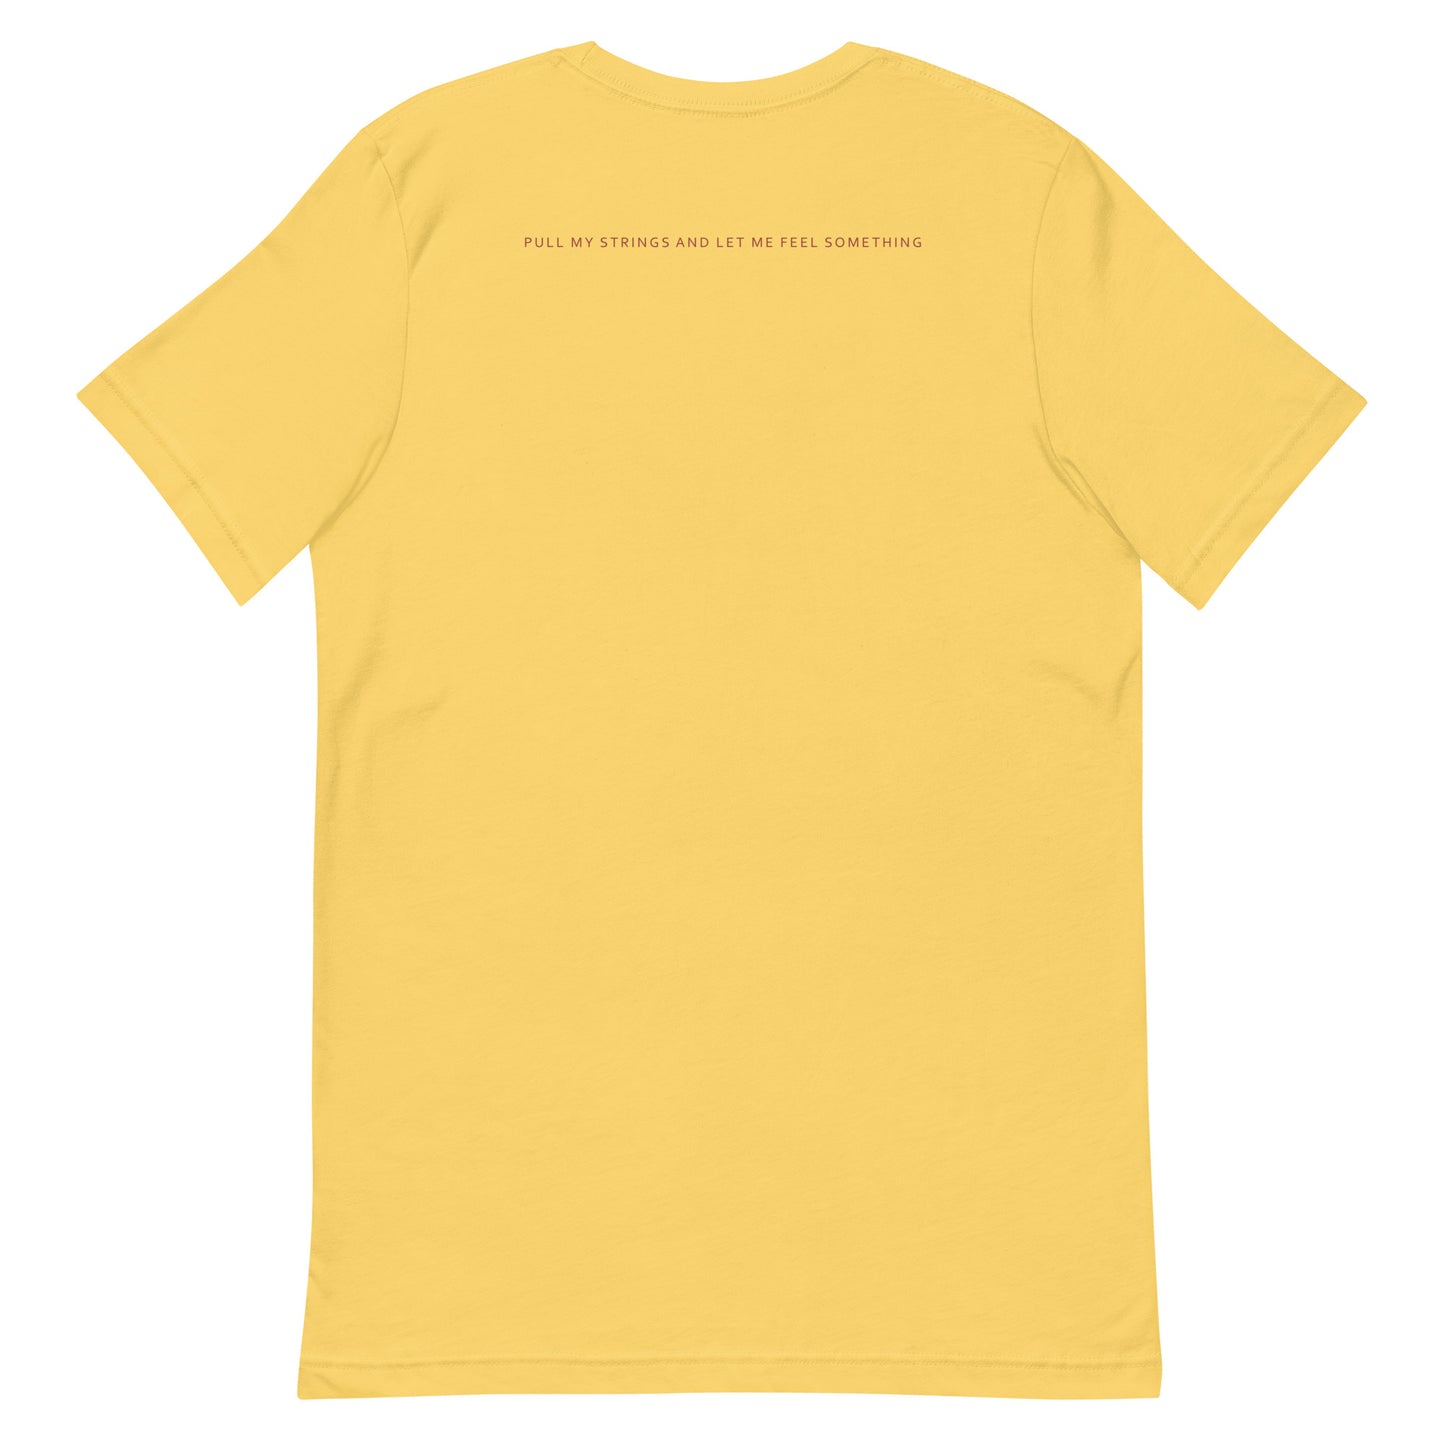 Don't Look At Me Tee (Yellow/Navy/Light Blue)